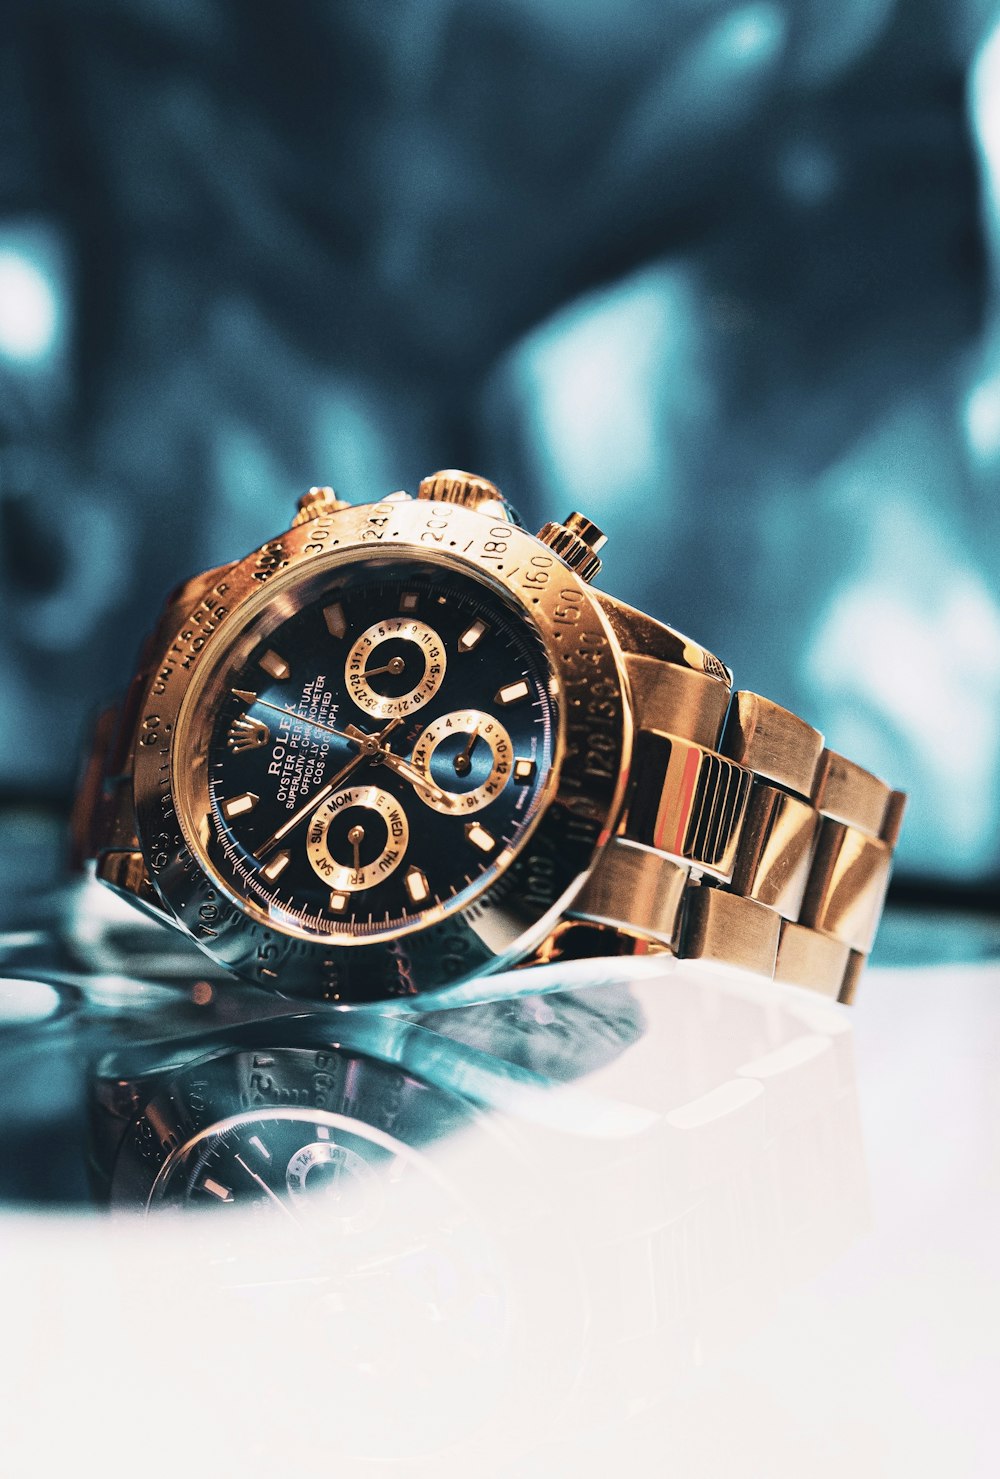 gold and black chronograph watch